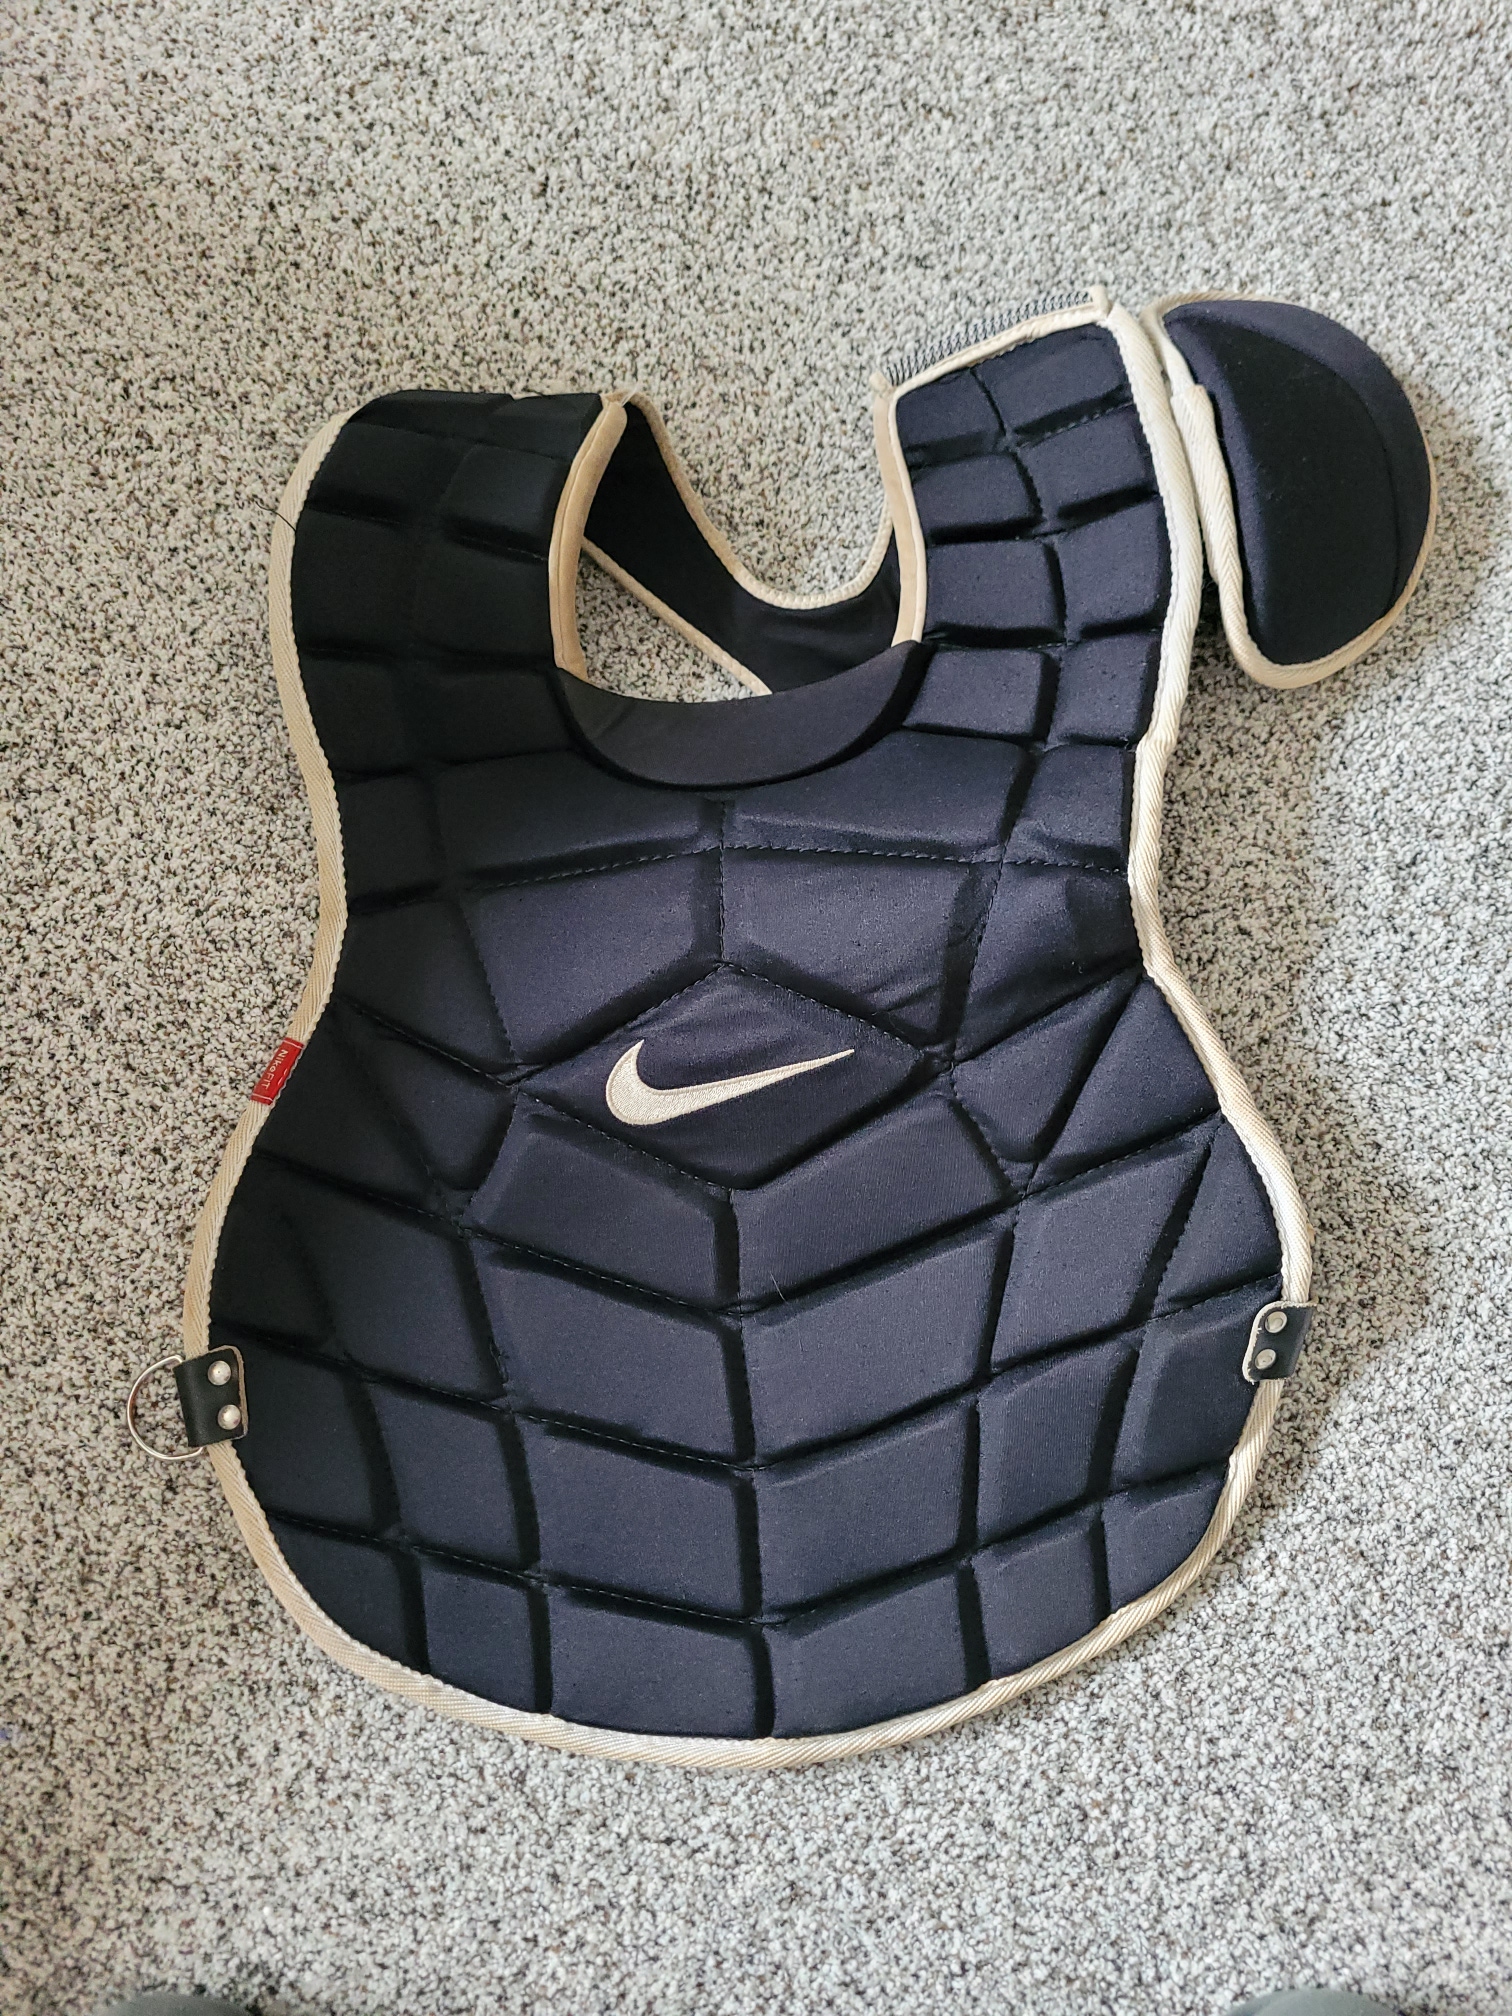 Used Nike DE3539 Catcher's Chest Protector